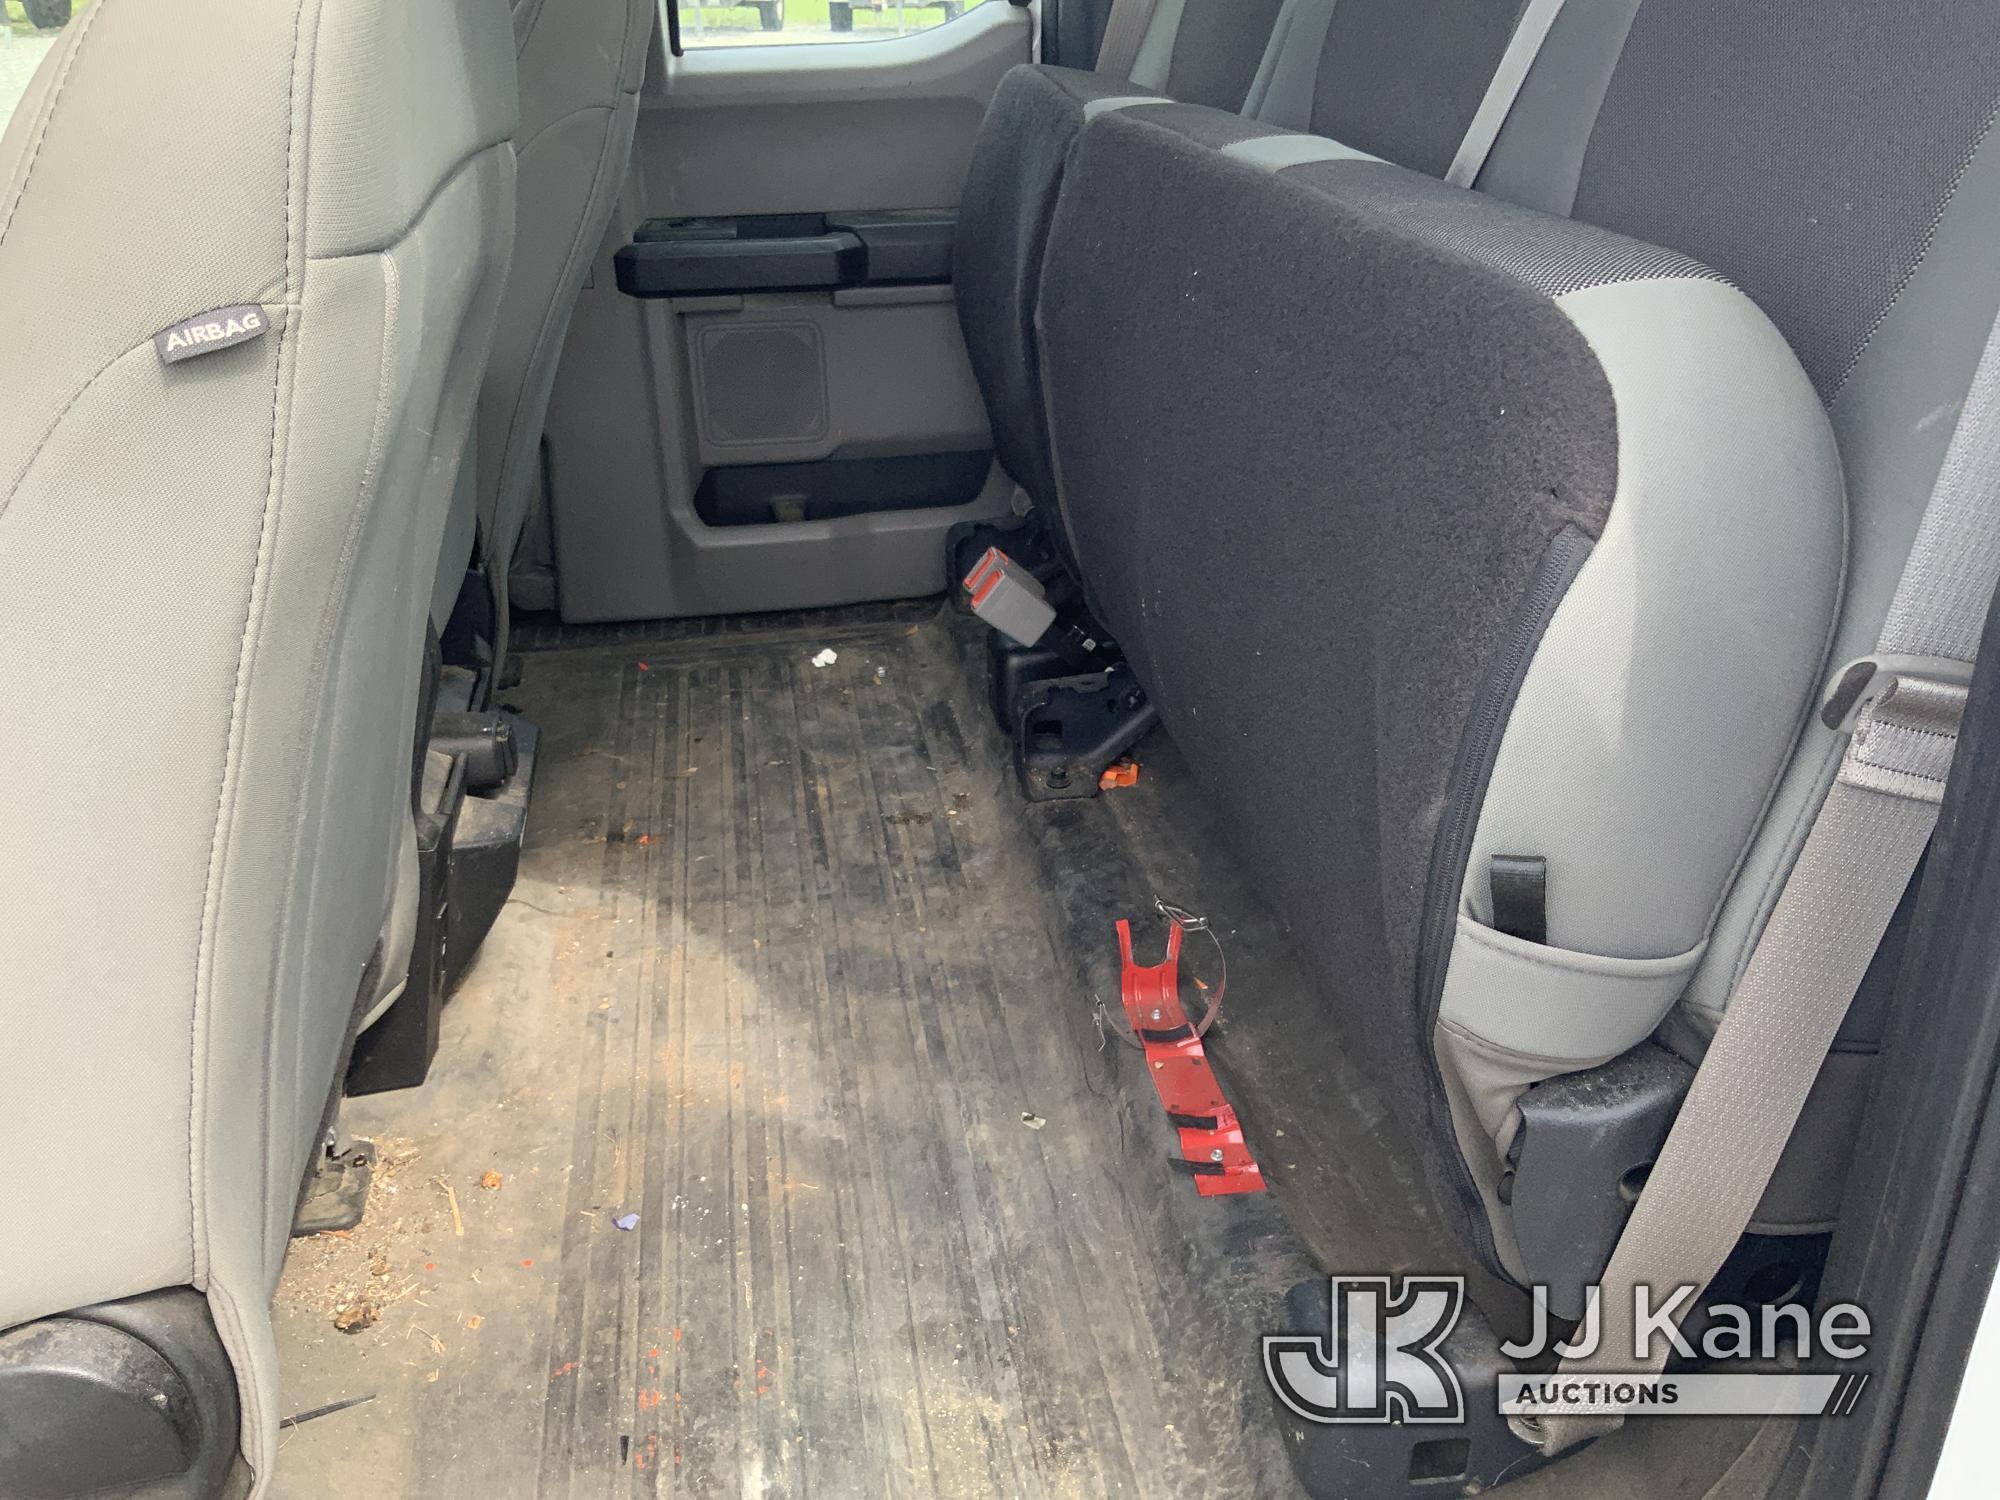 (Hawk Point, MO) 2019 Ford F150 Extended-Cab Pickup Truck Runs Rough & Moves) (Check Engine Light On